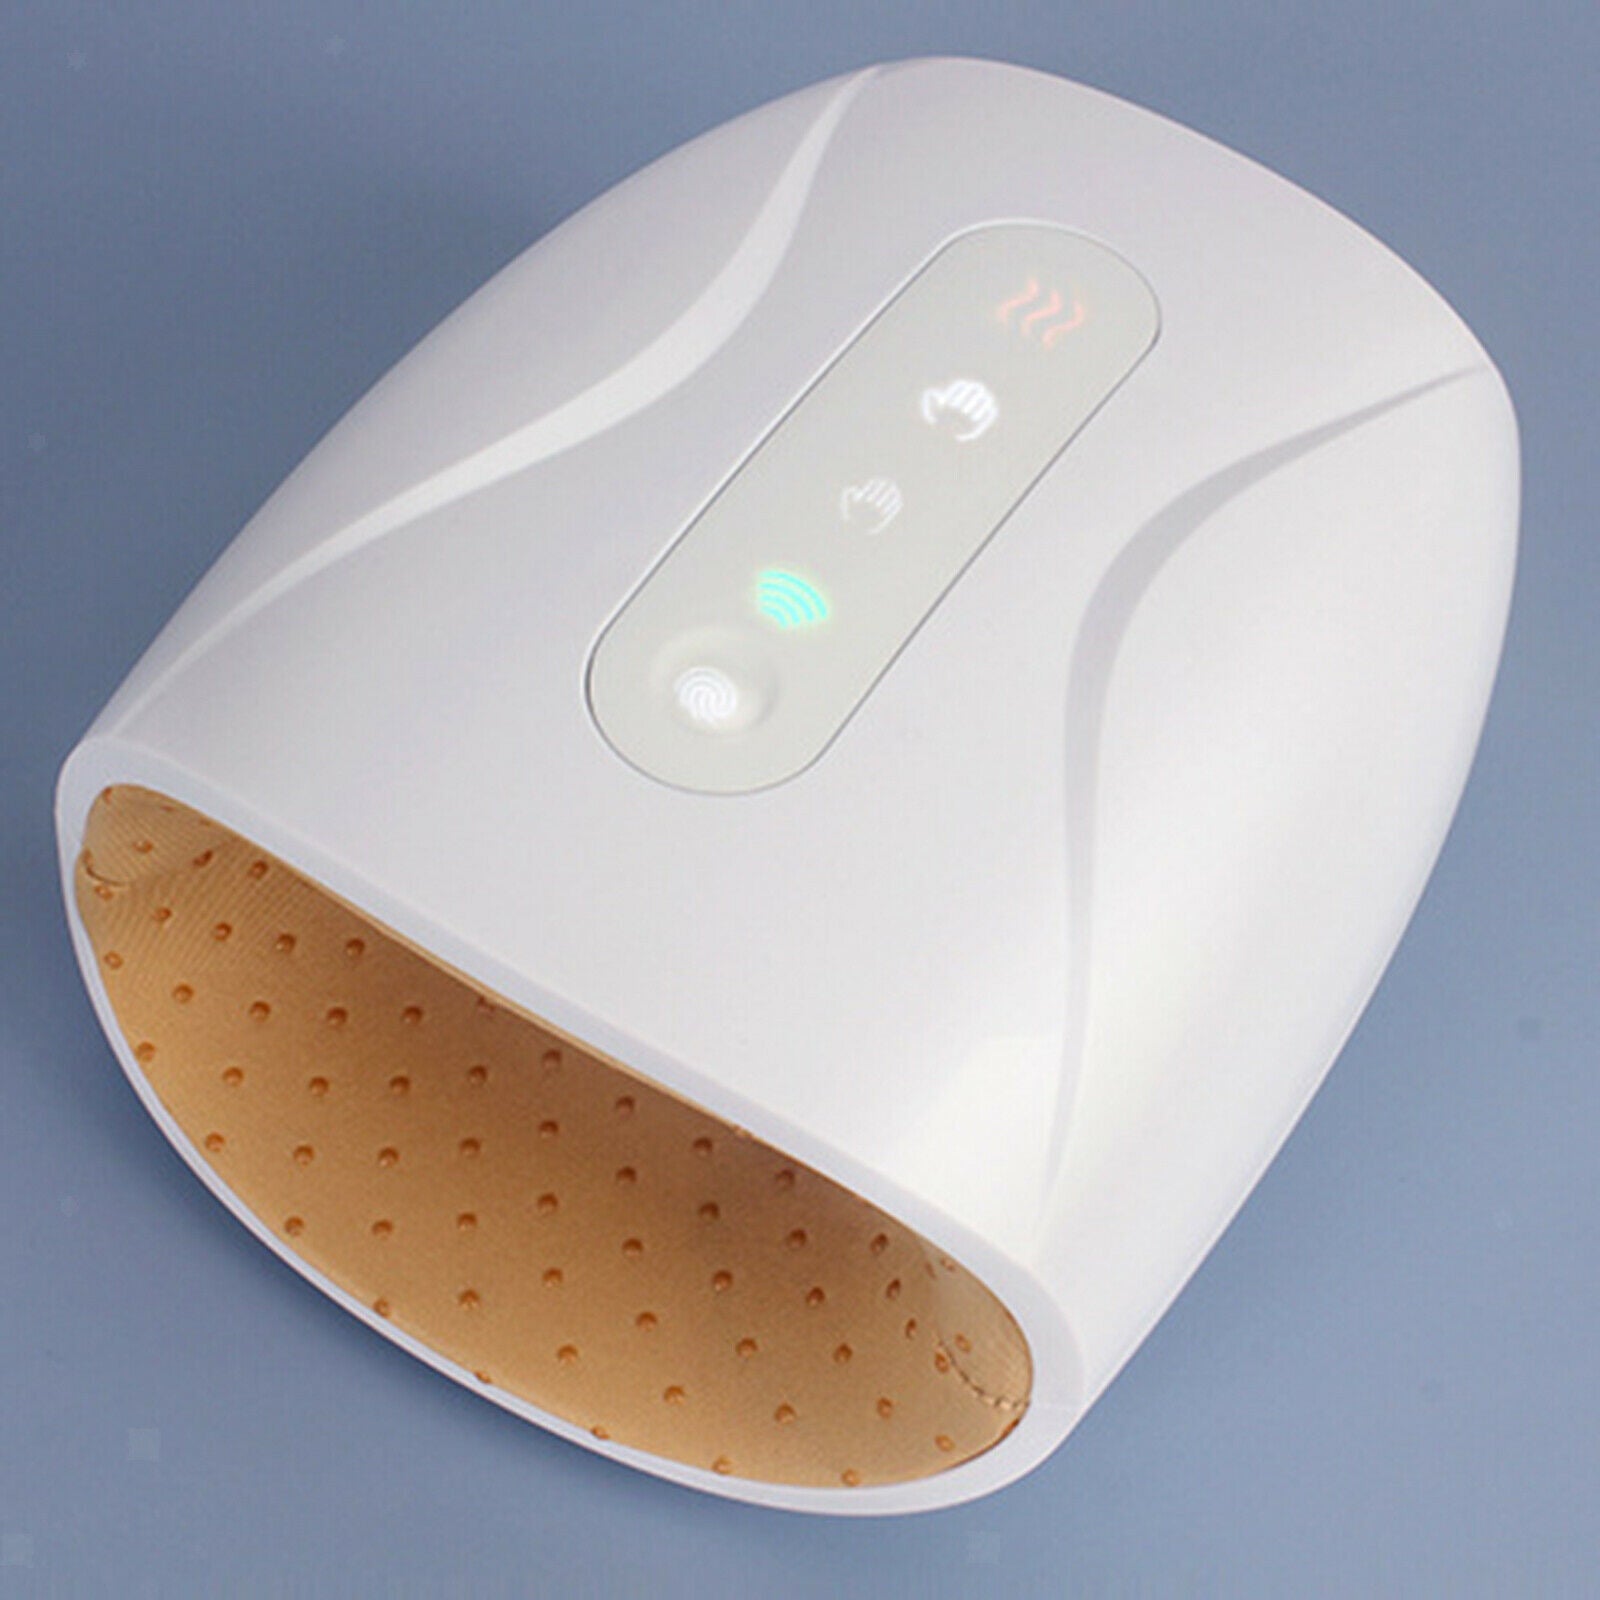 Cordless Air Compression Hand Massager with Heat Compression for Arthritis